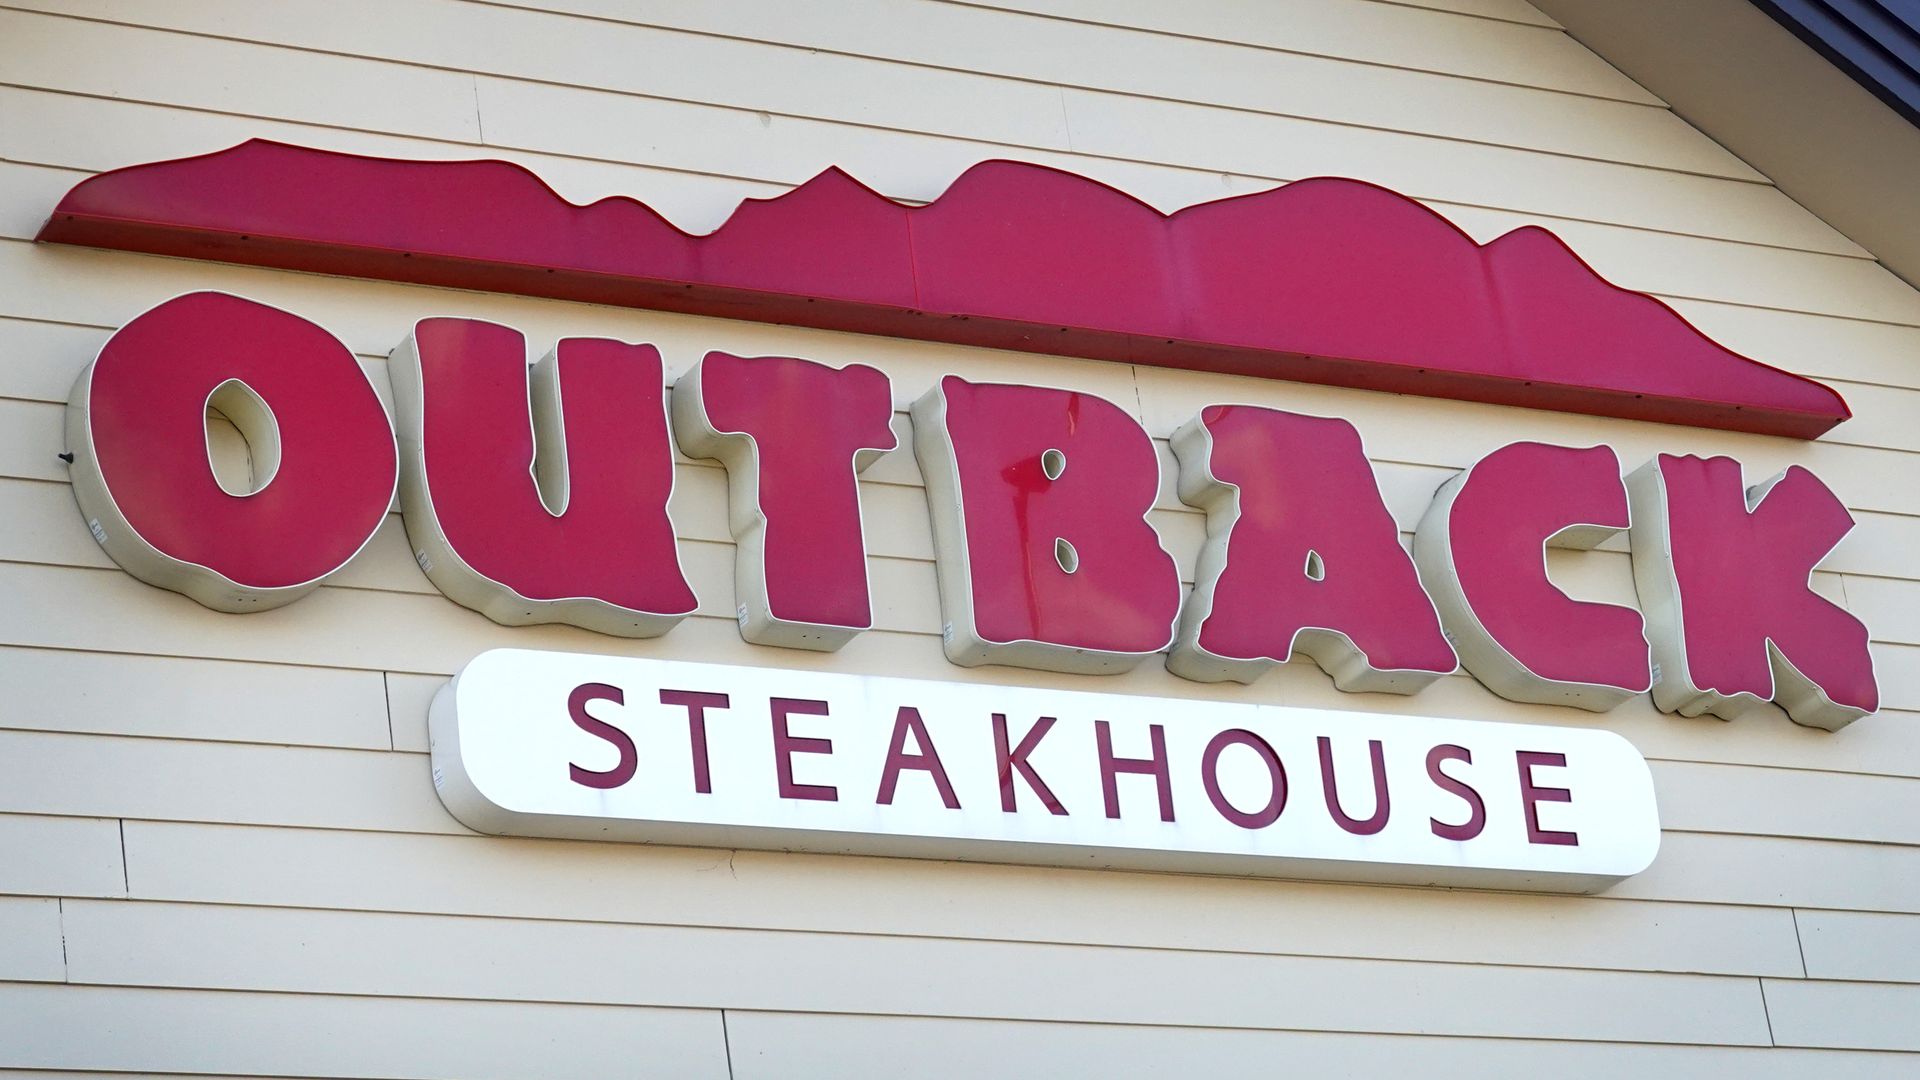 sign for Outback Steakhouse